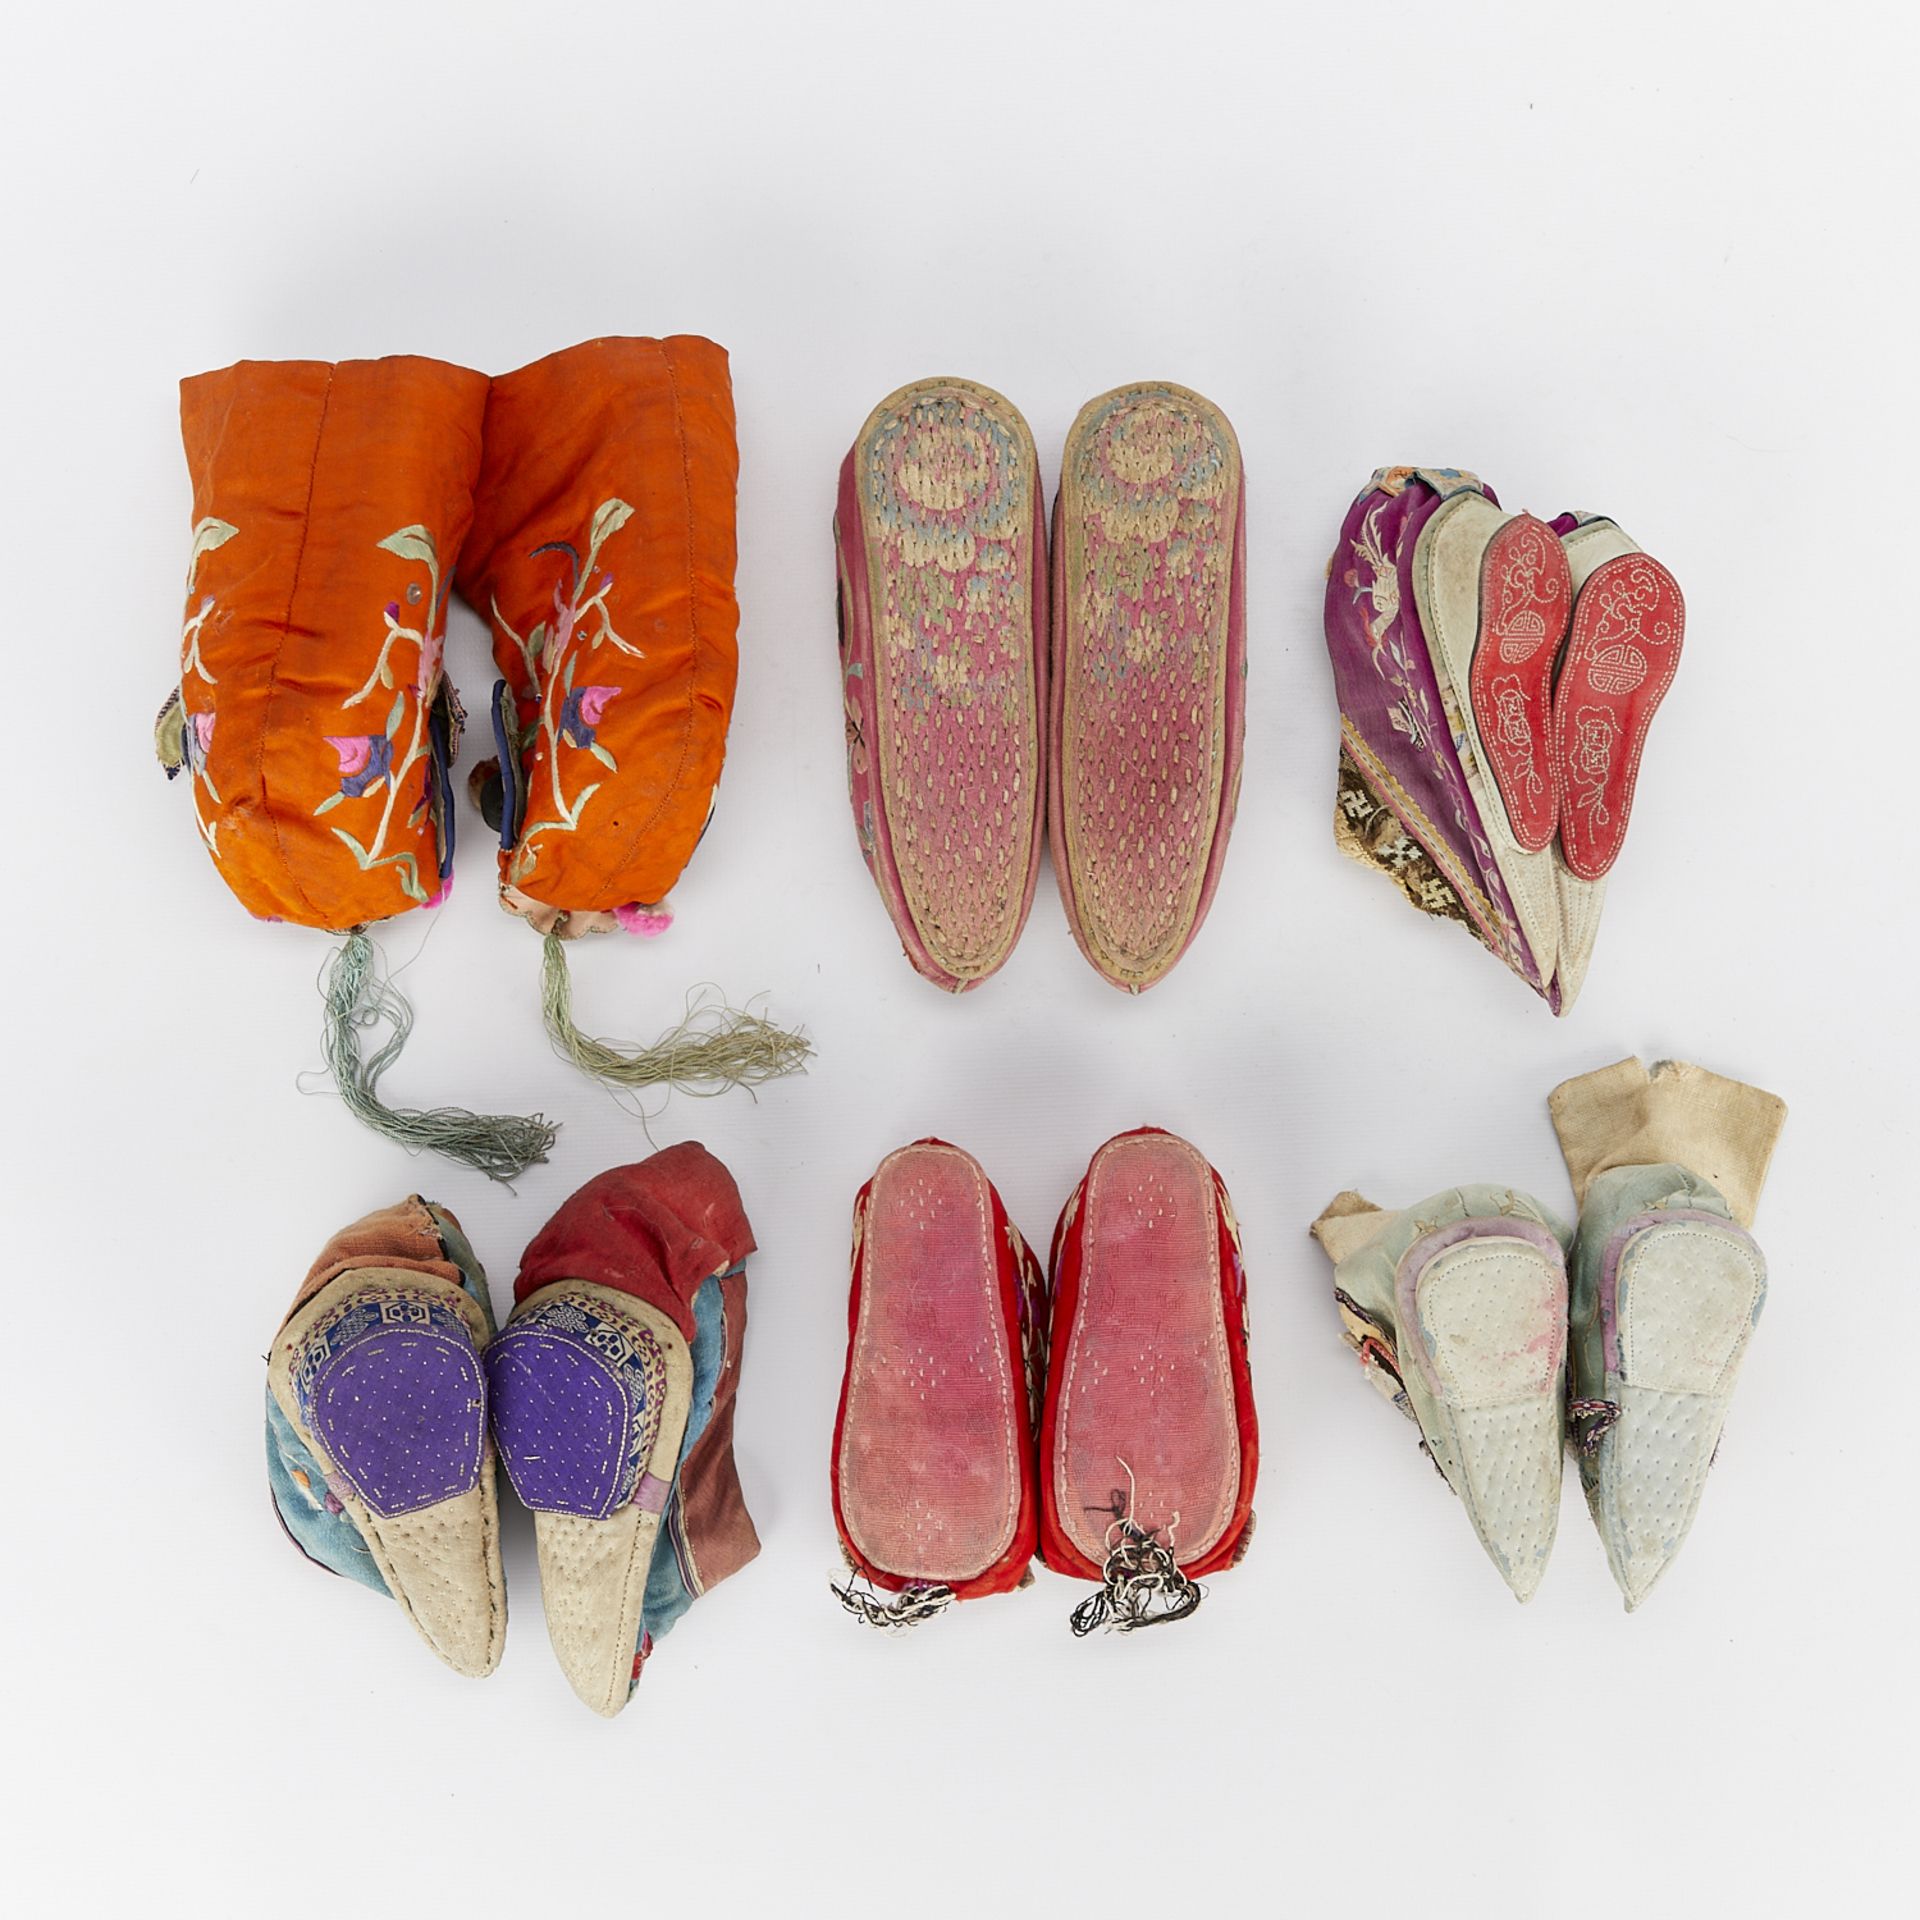 6 Pairs of Chinese Silk Foot Binding Shoes - Image 12 of 12